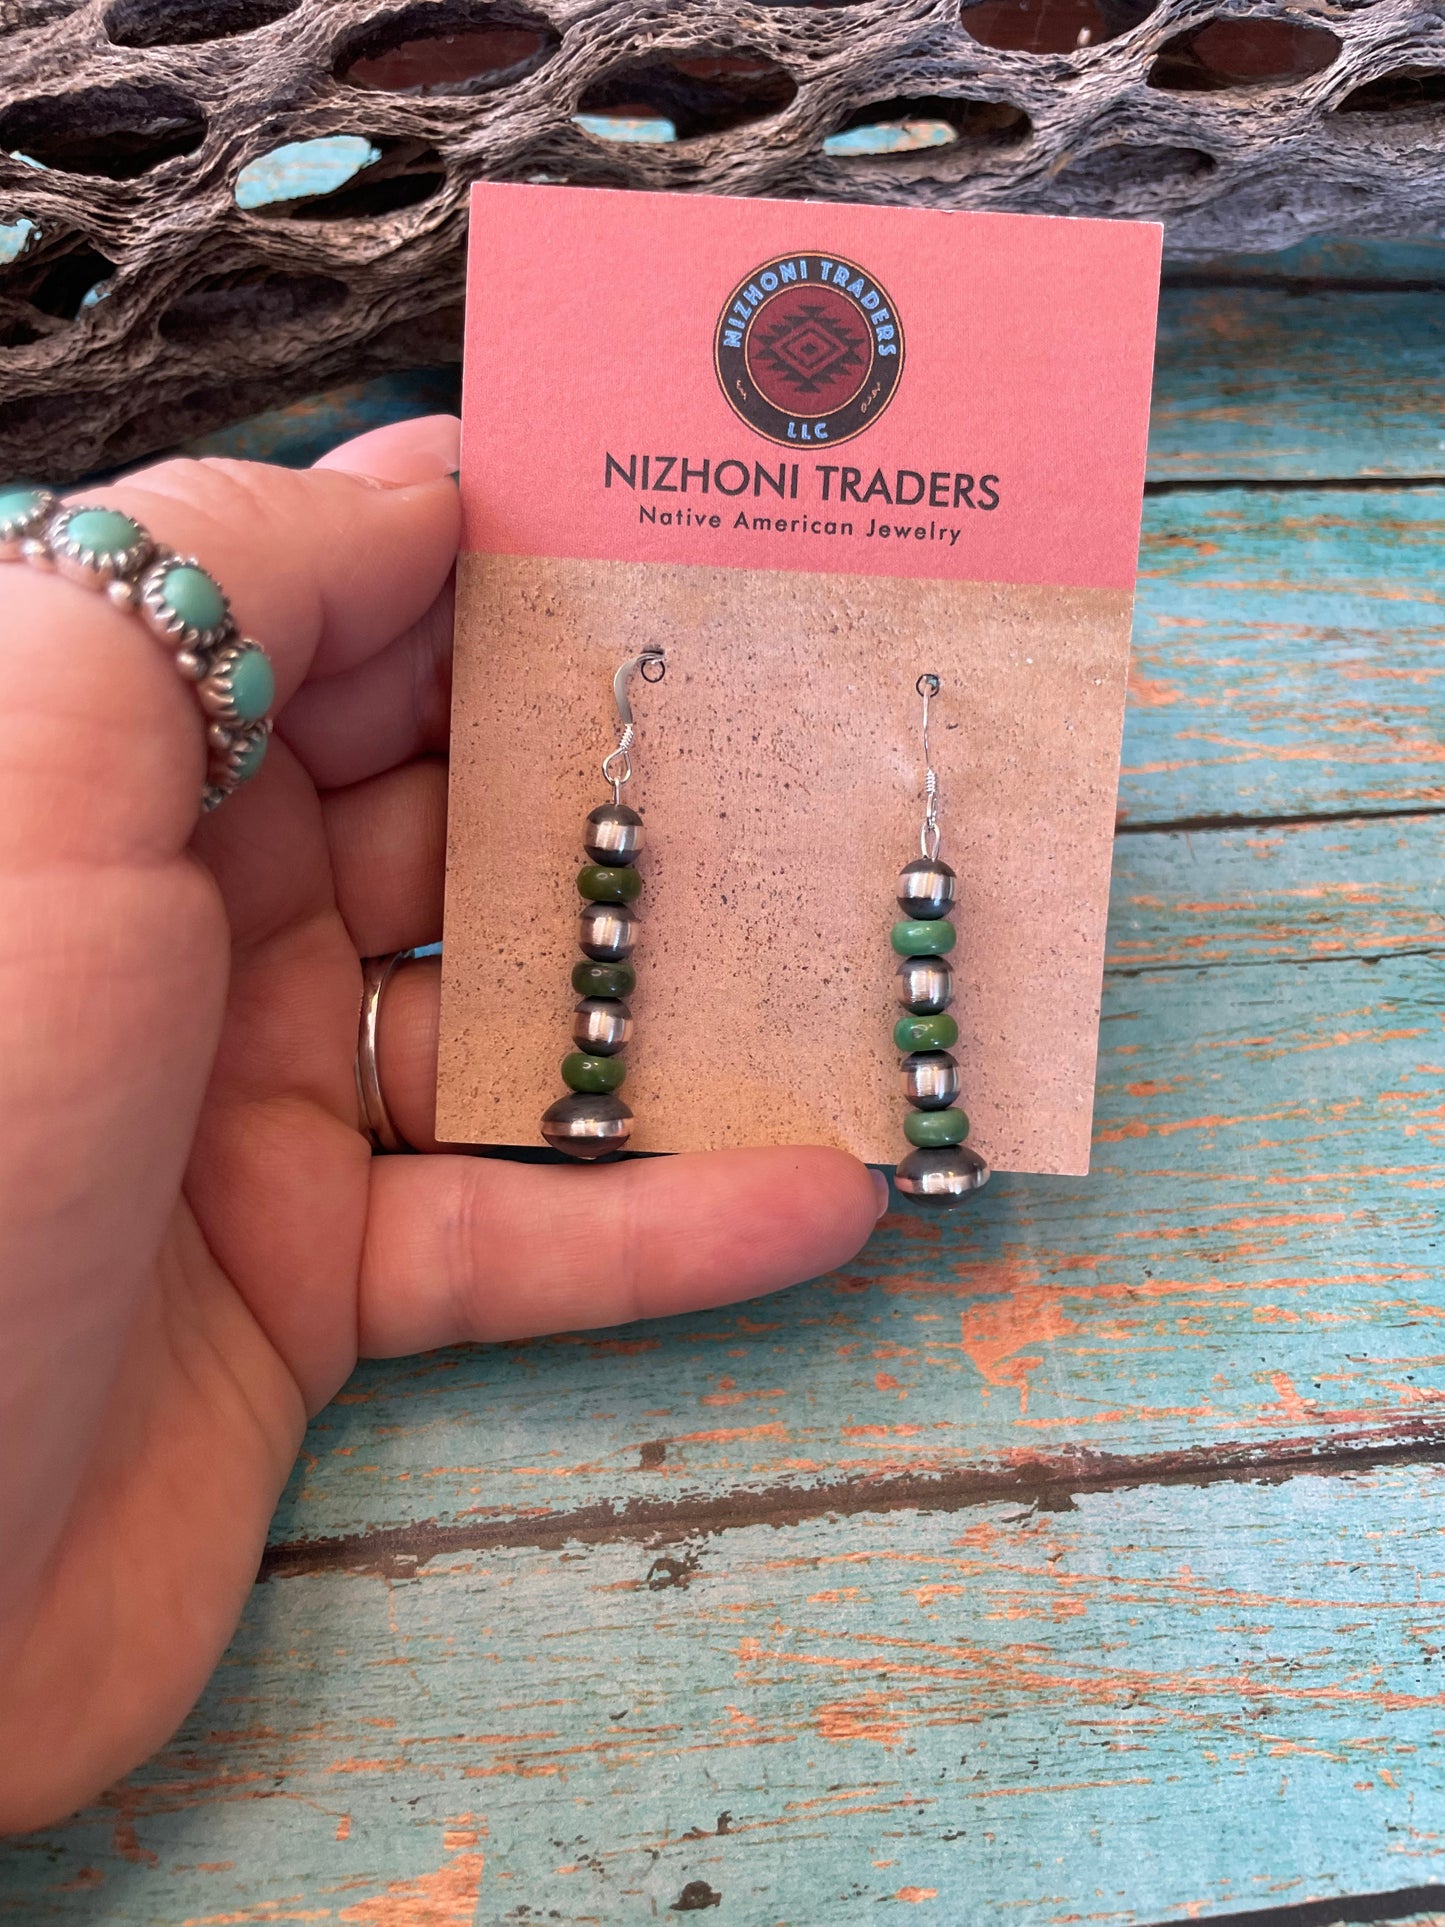 Navajo Sterling Silver And Sonoran Gold Turquoise Beaded Earrings